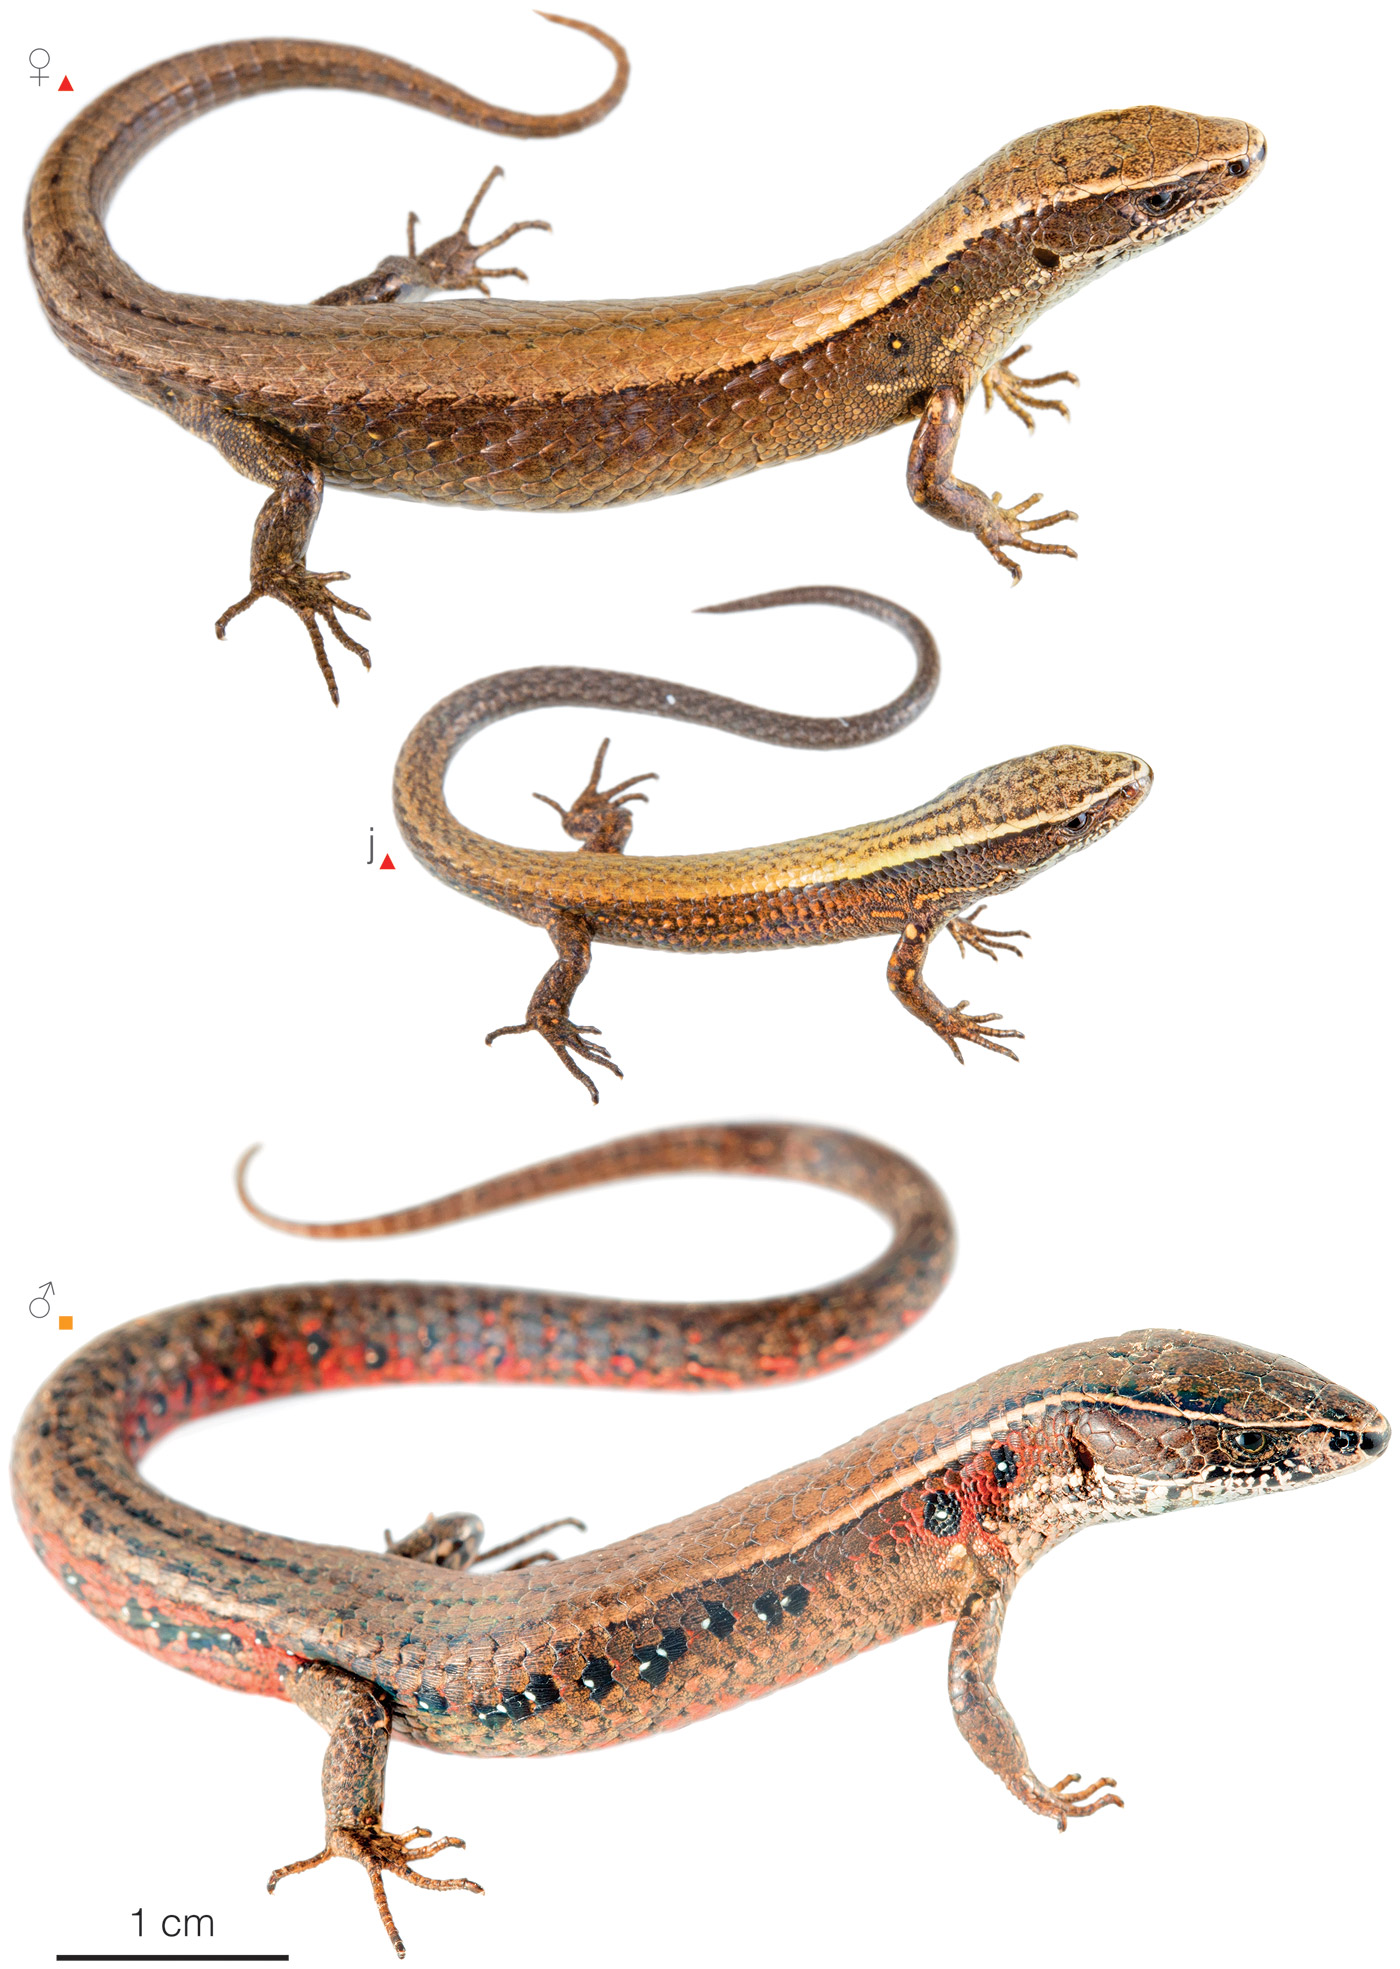 Figure showing variation among individuals of Macropholidus montanuccii